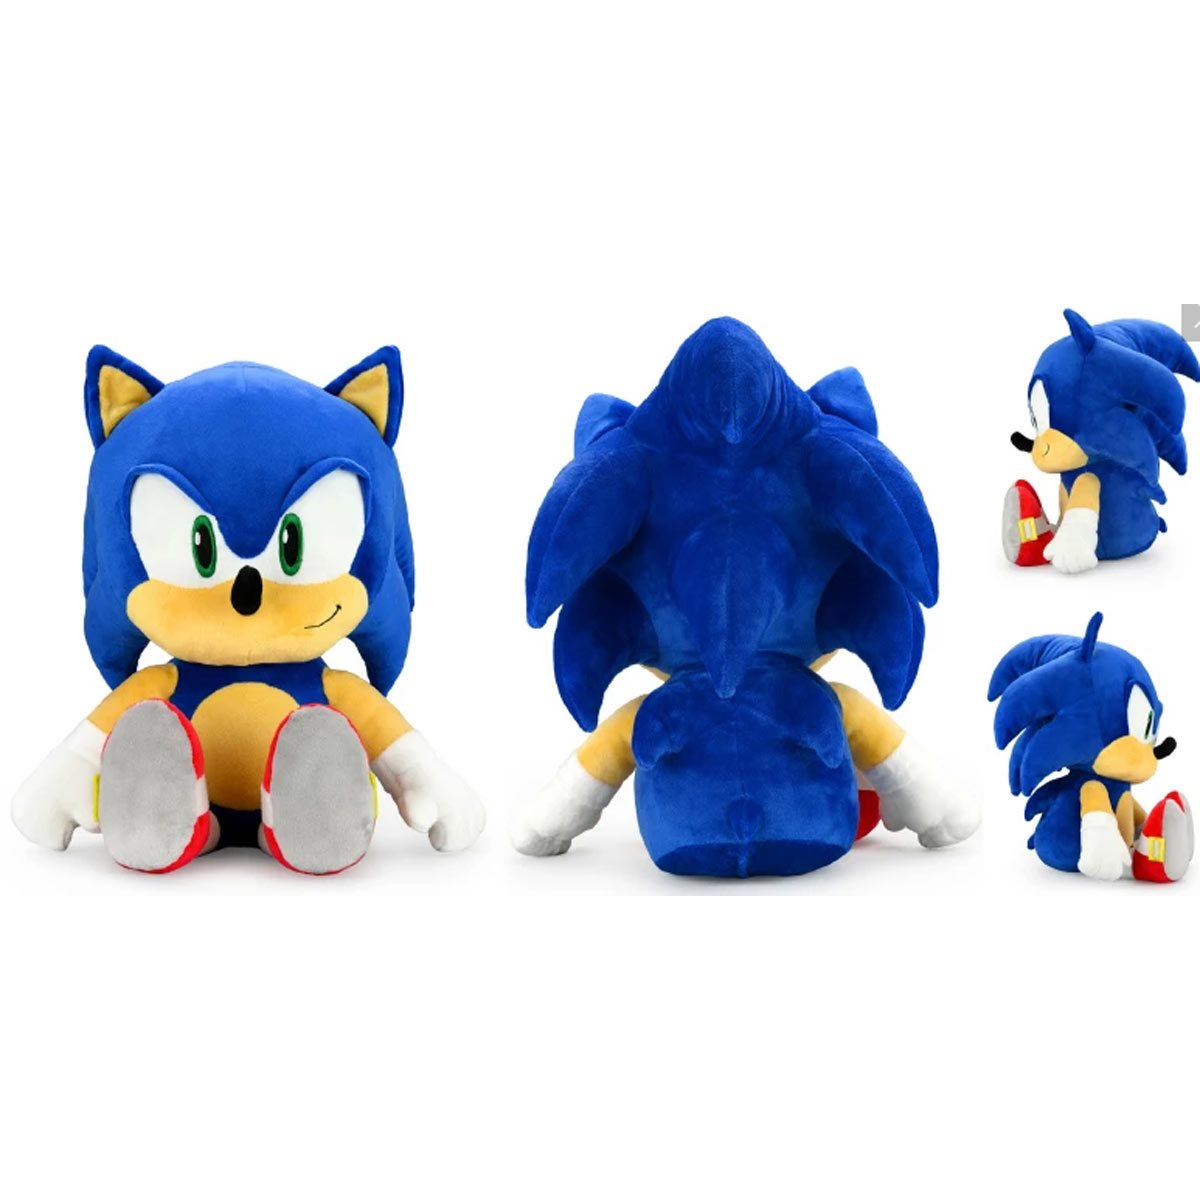 Sonic the Hedgehog 16 HugMe Plush with Shake Action - Super Sonic